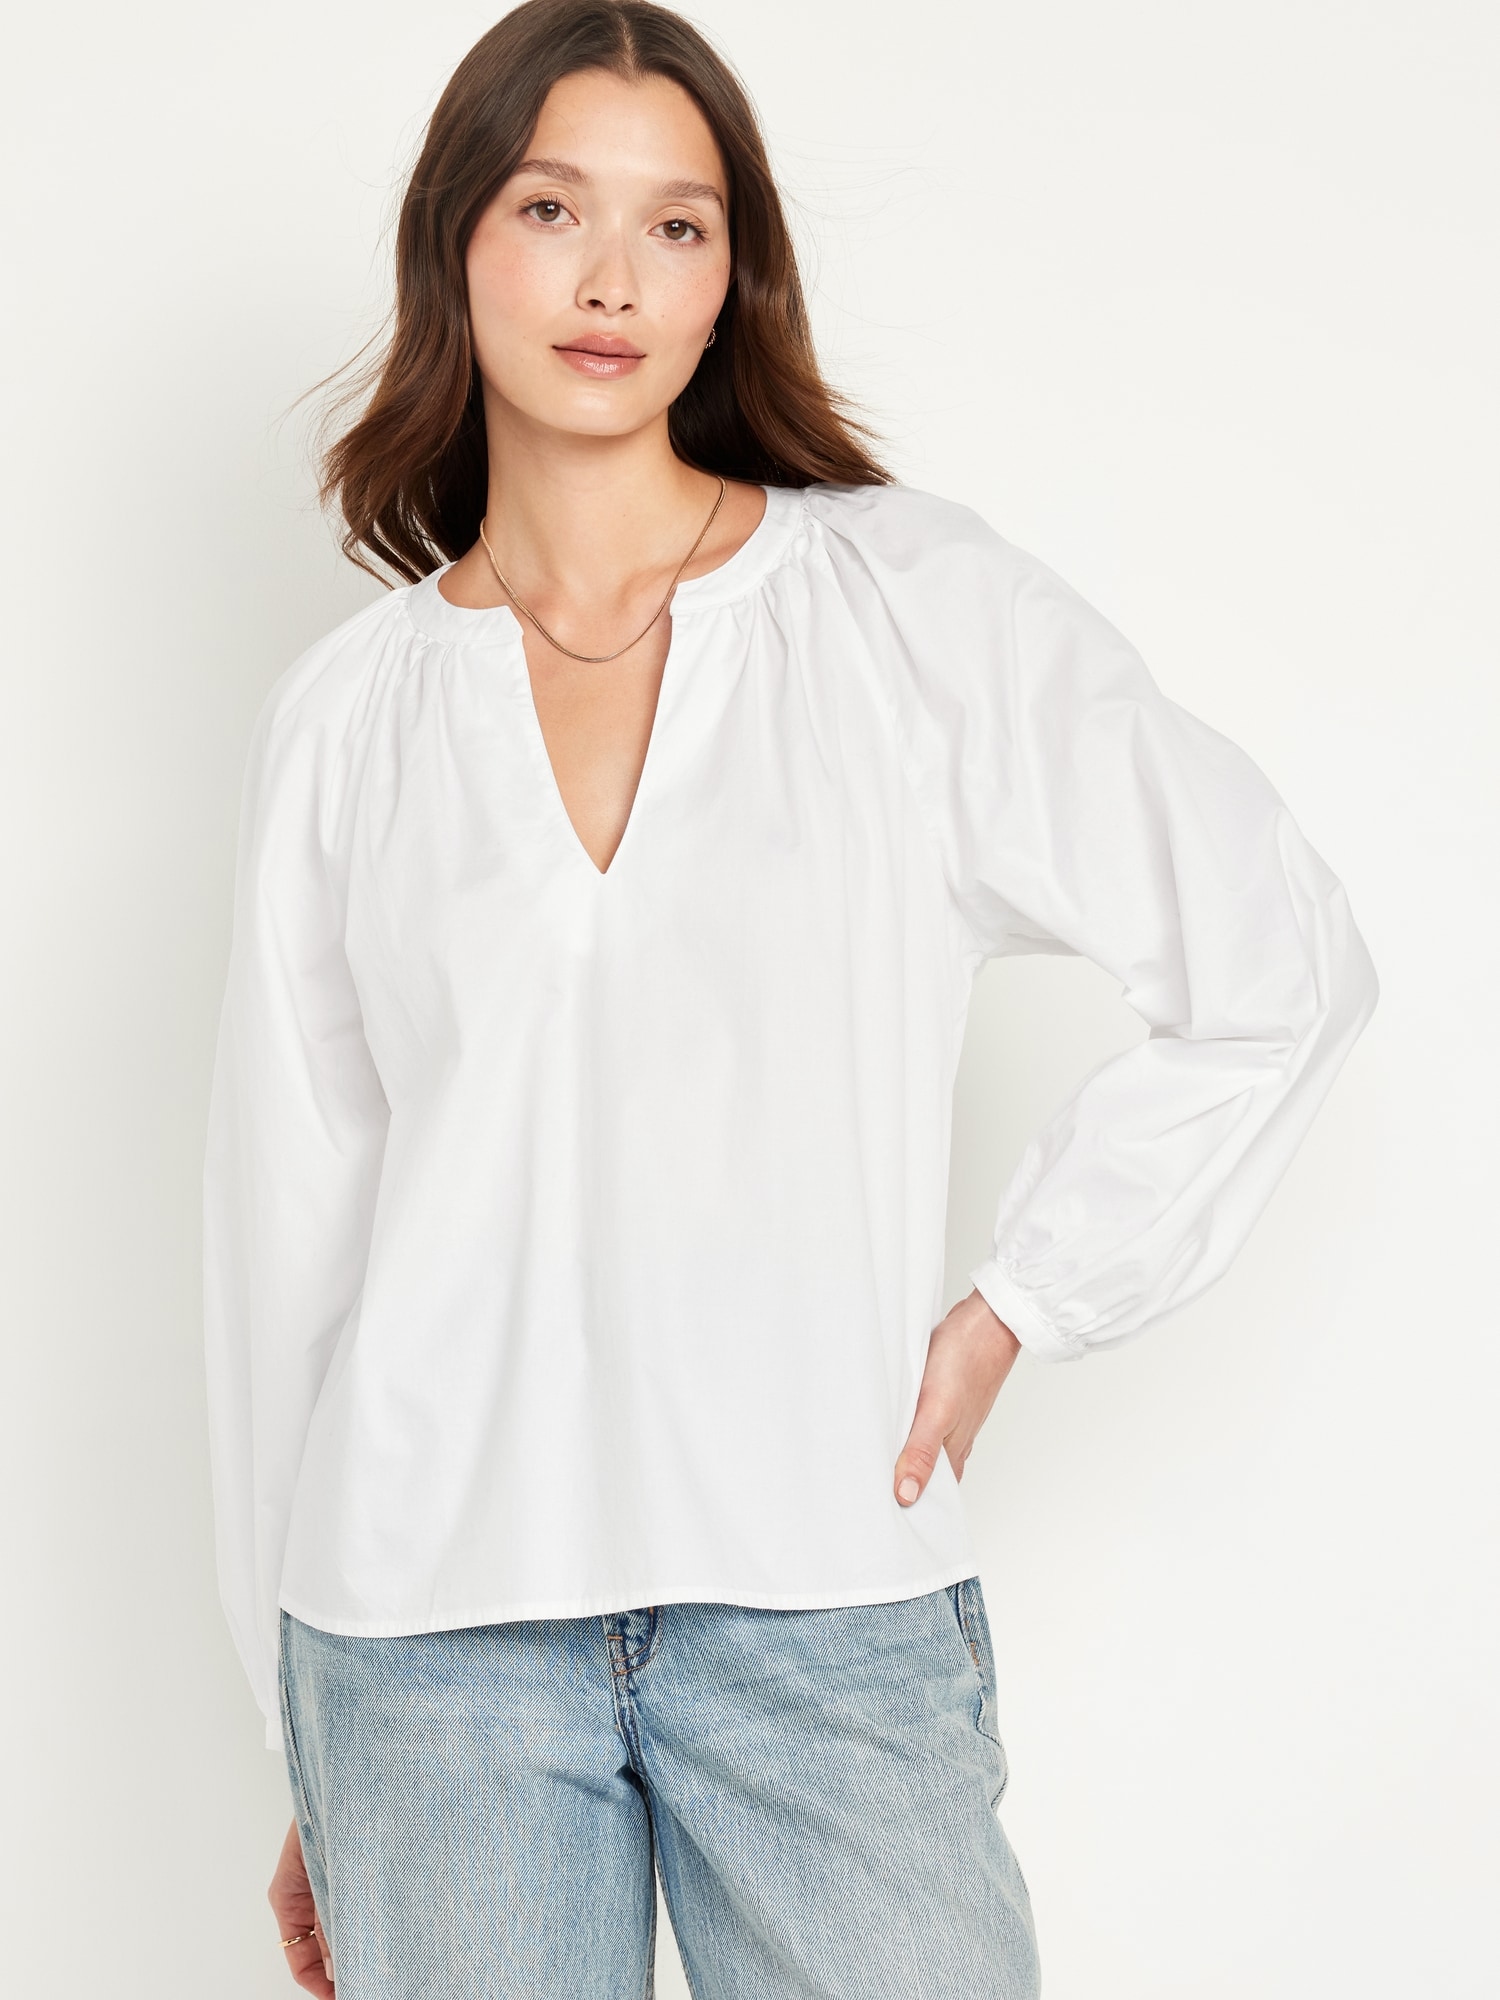 Long Sleeve Relaxed Fit Tops